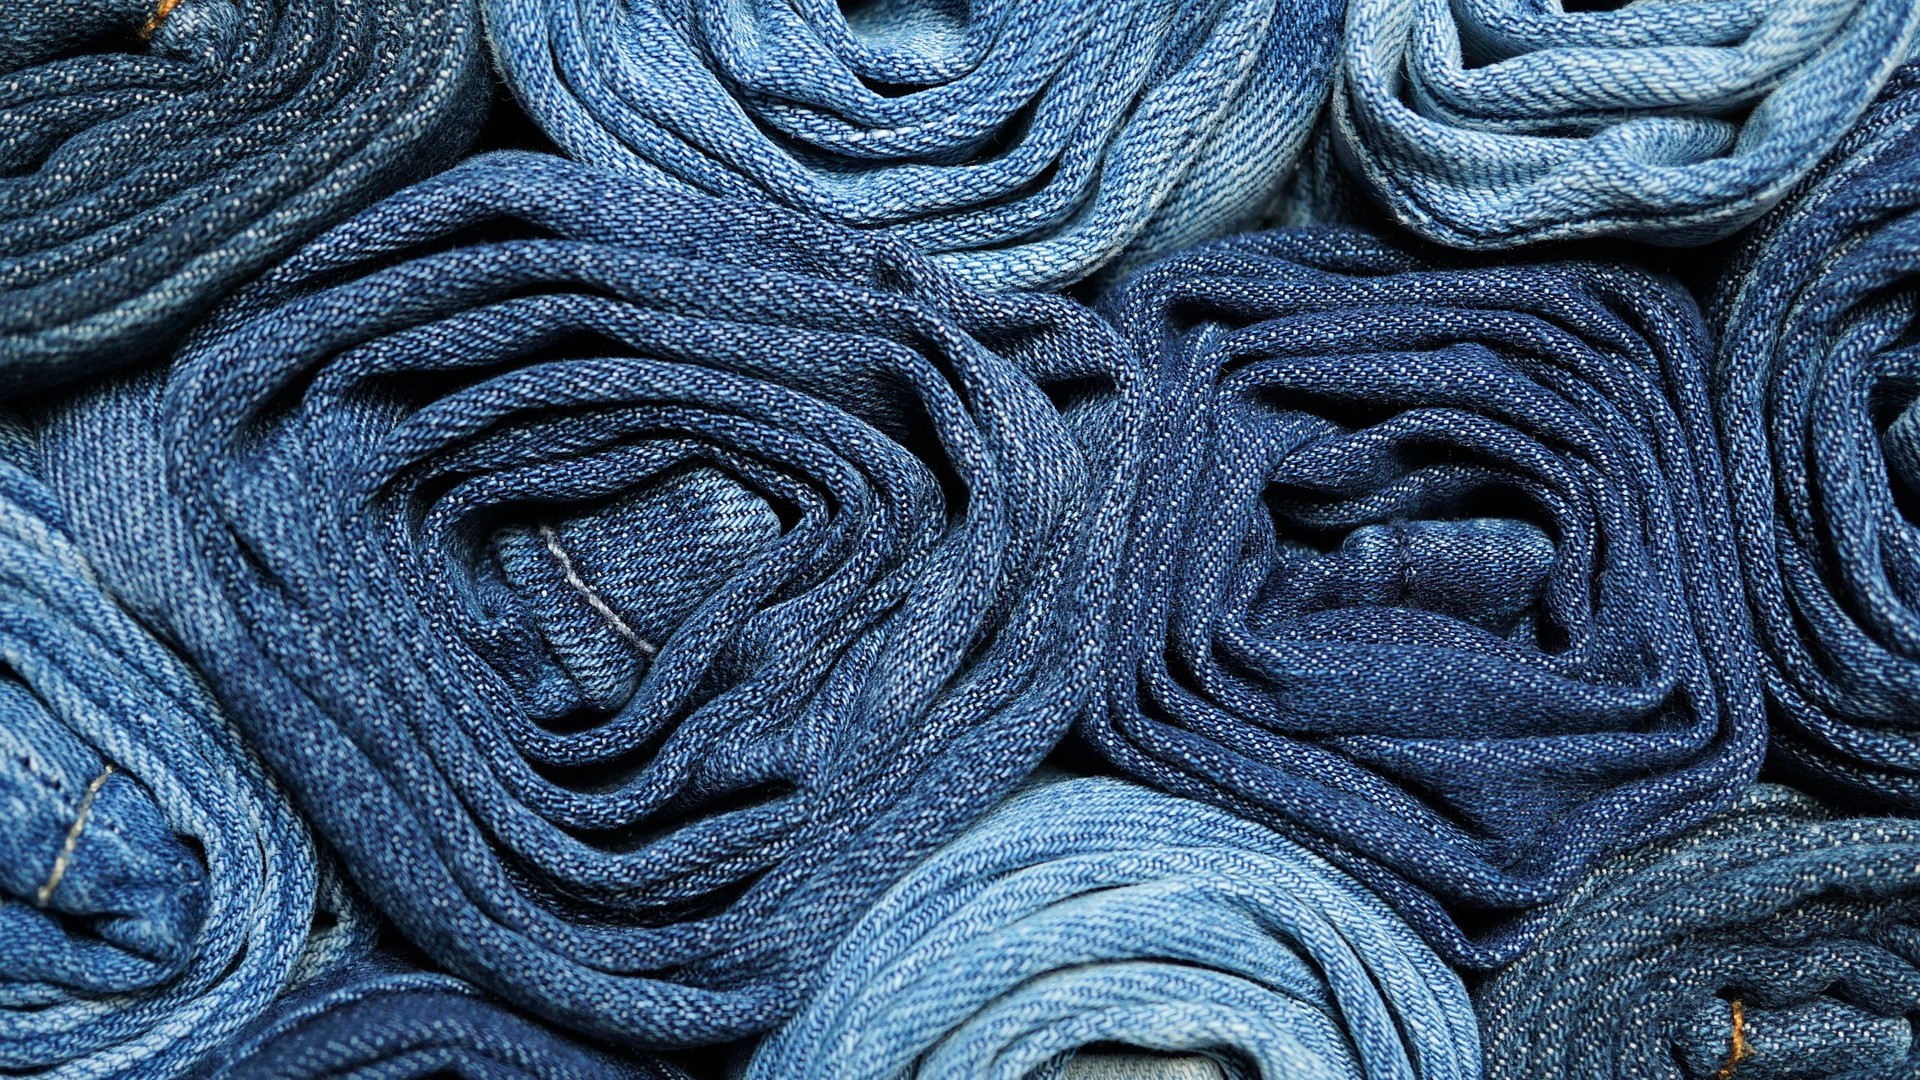 An image showing a pile of denim jeans